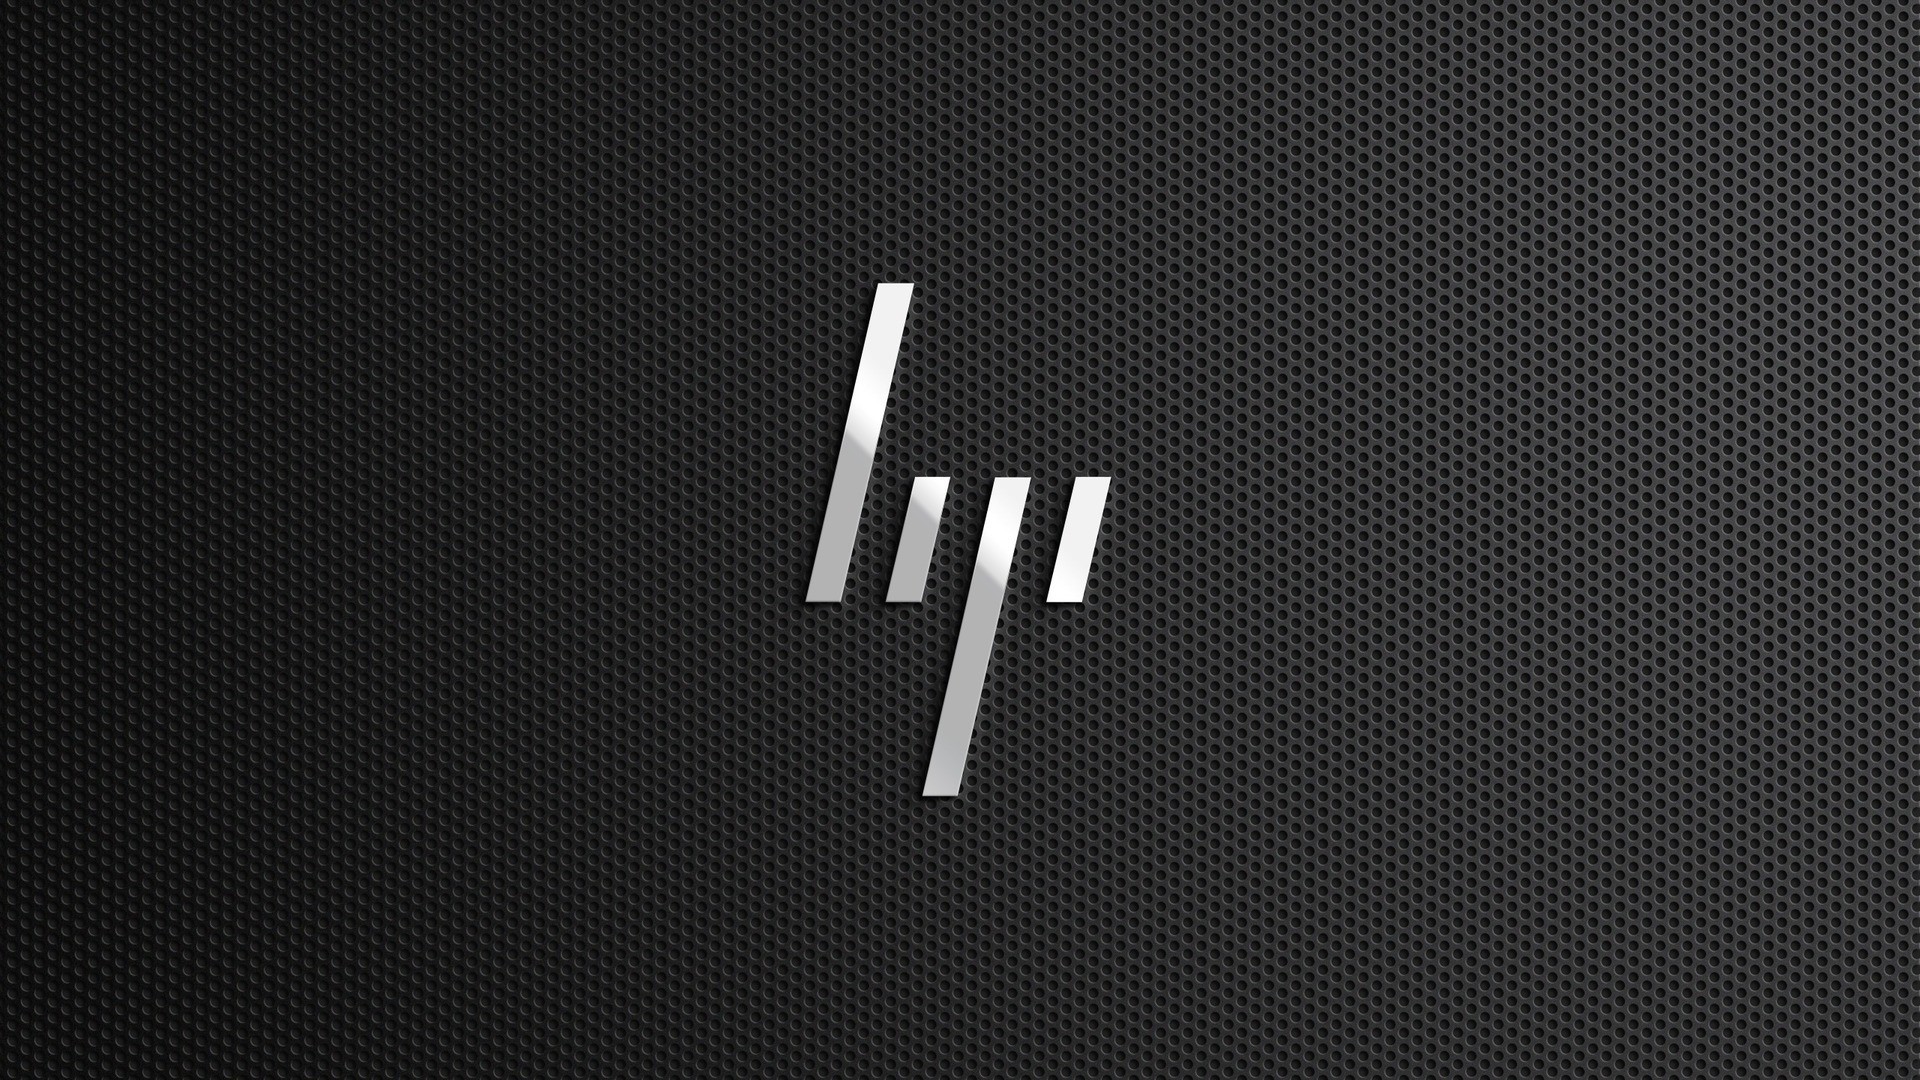 Free download HP Company Logo in Black Background Image HD Famous Wallpaper [1920x1080] for your Desktop, Mobile & Tablet. Explore The Wallpaper Company. The Wallpaper Company Canada, High End